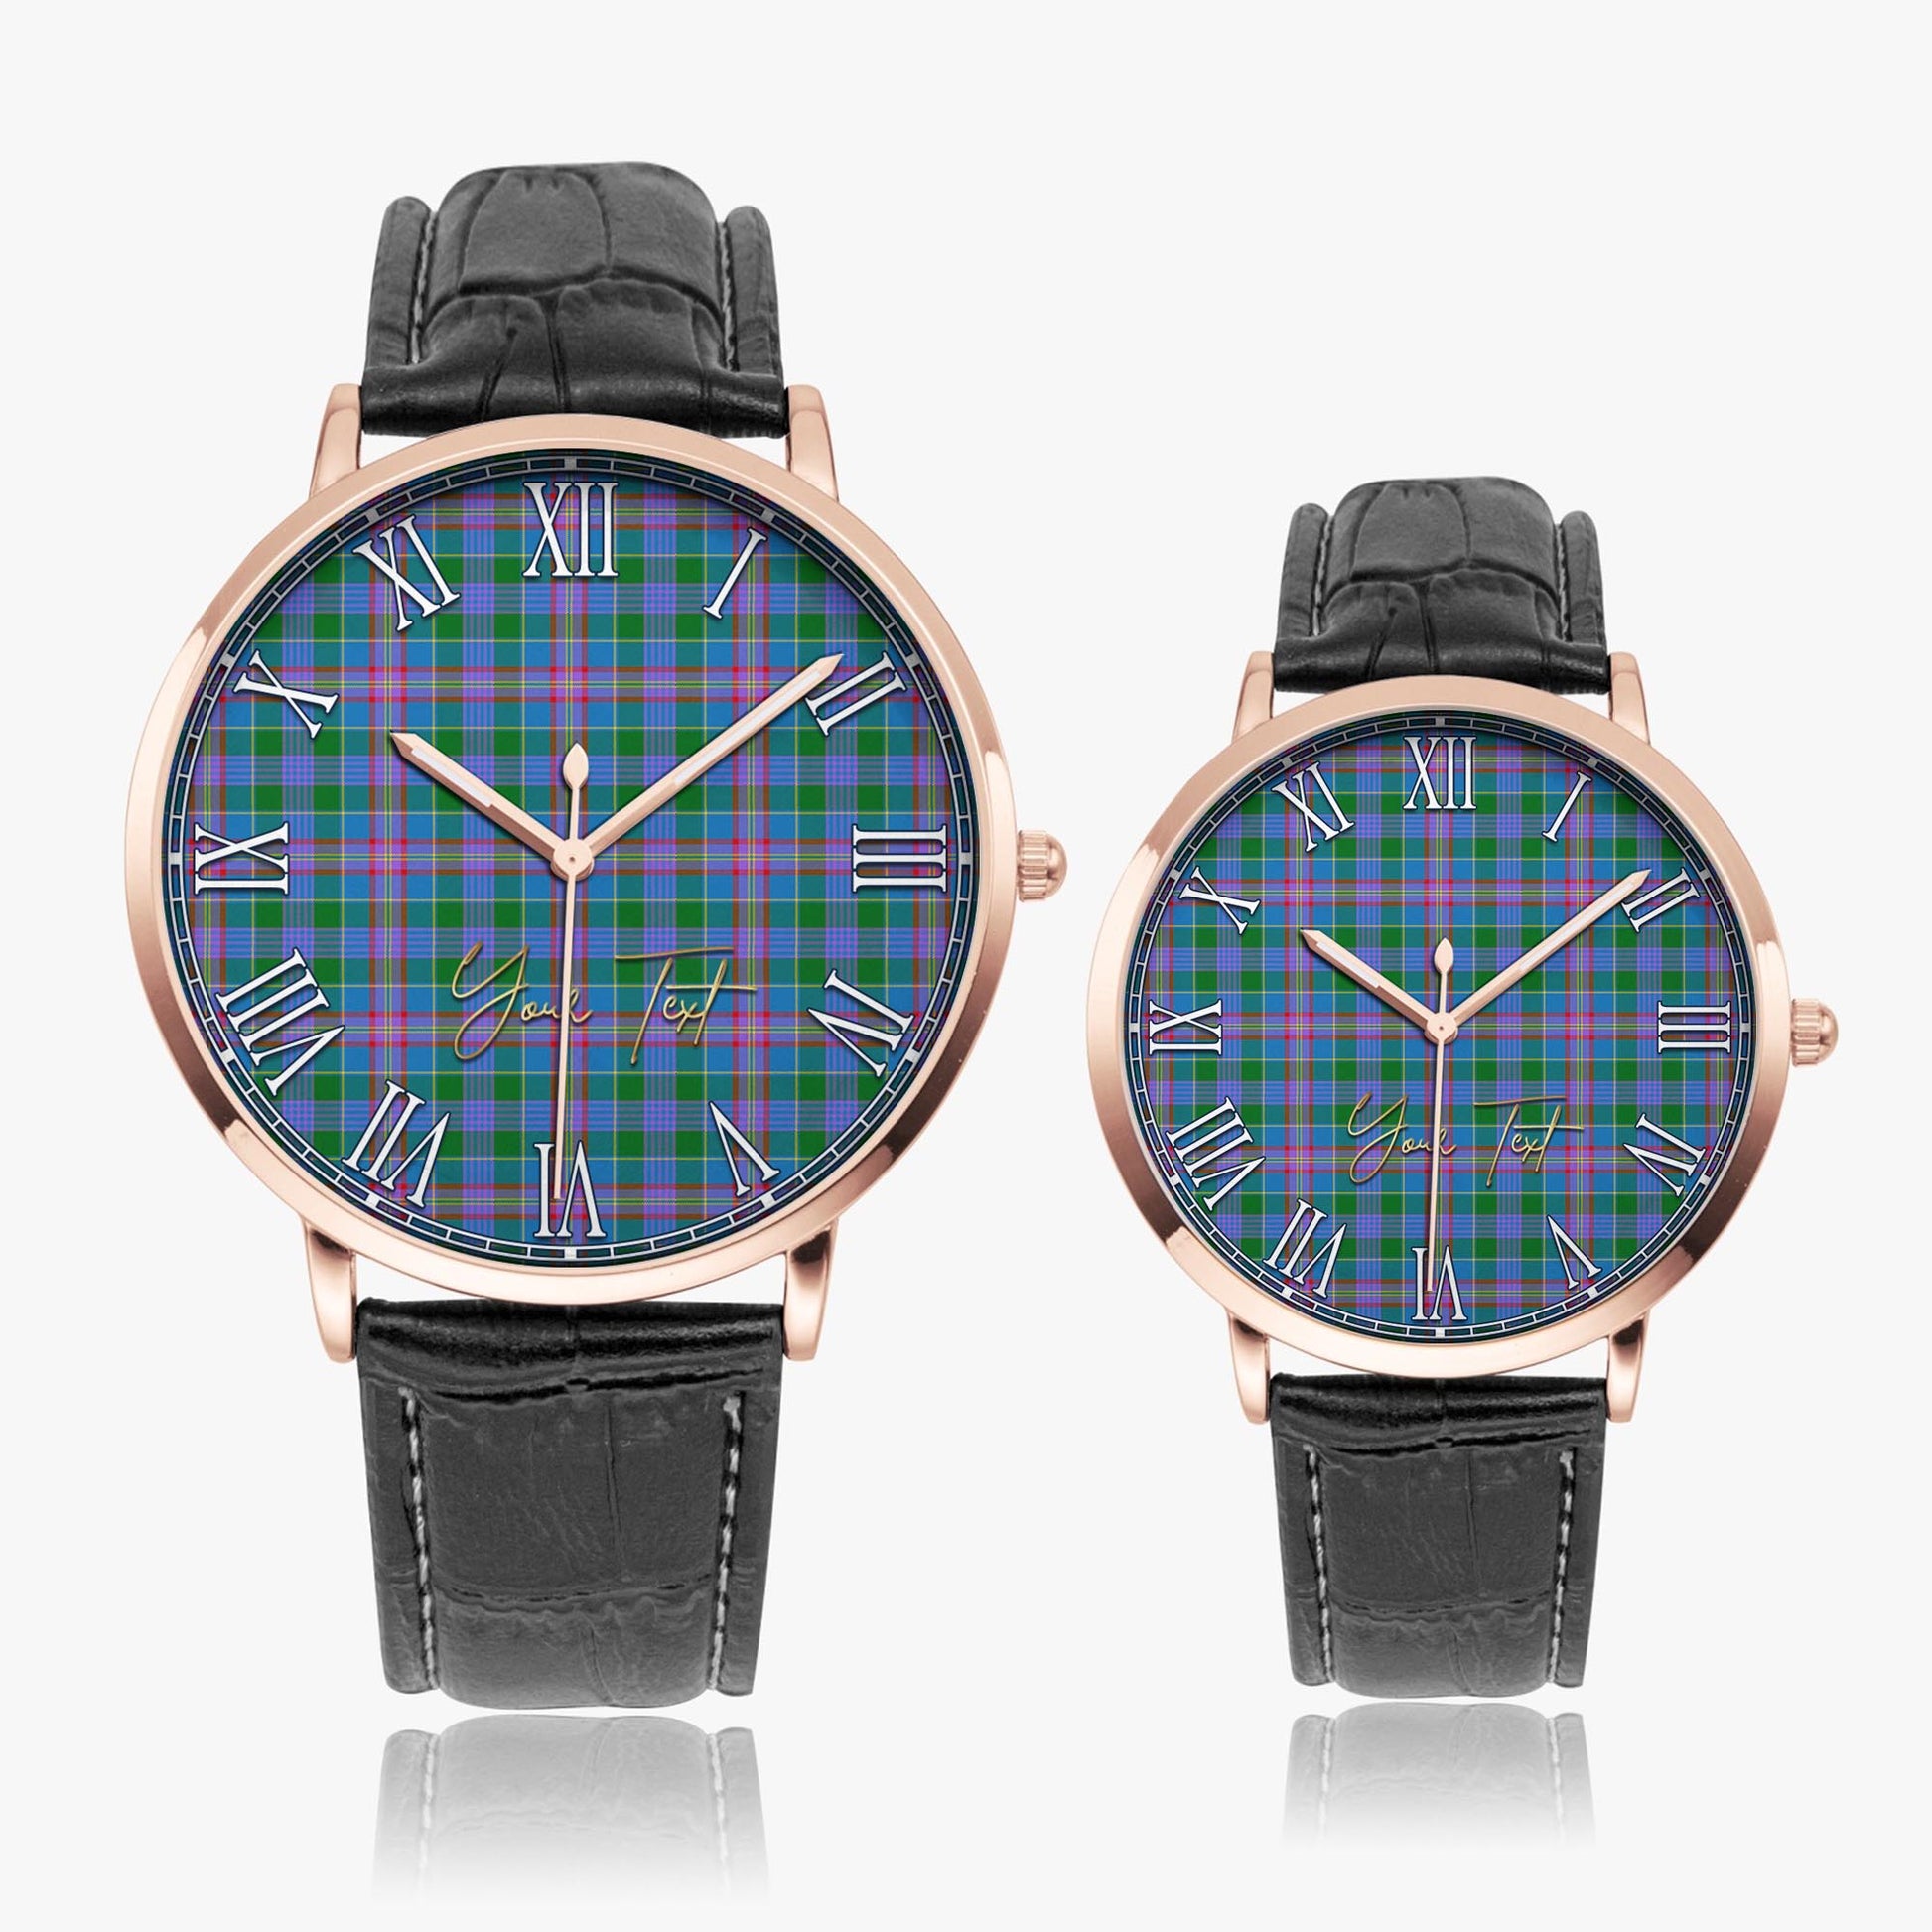 Ralston Tartan Personalized Your Text Leather Trap Quartz Watch Ultra Thin Rose Gold Case With Black Leather Strap - Tartanvibesclothing